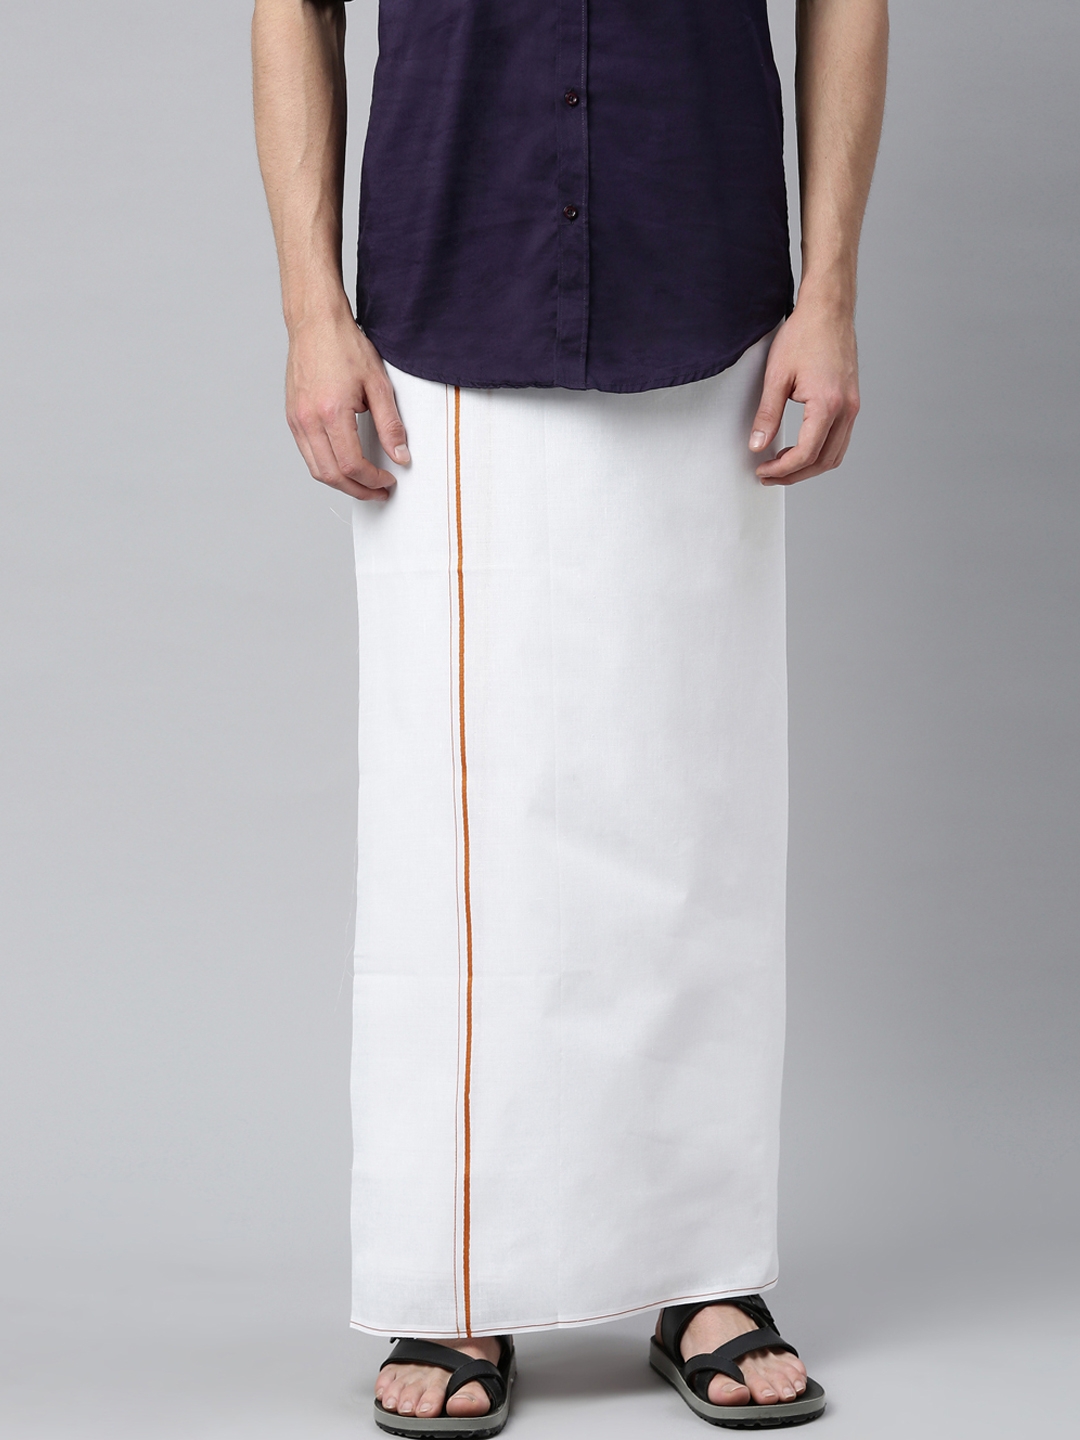 WHITE HEART | White Heart Mens 100% Cotton White Double and Small Border Dhoti - Pack of 2 5